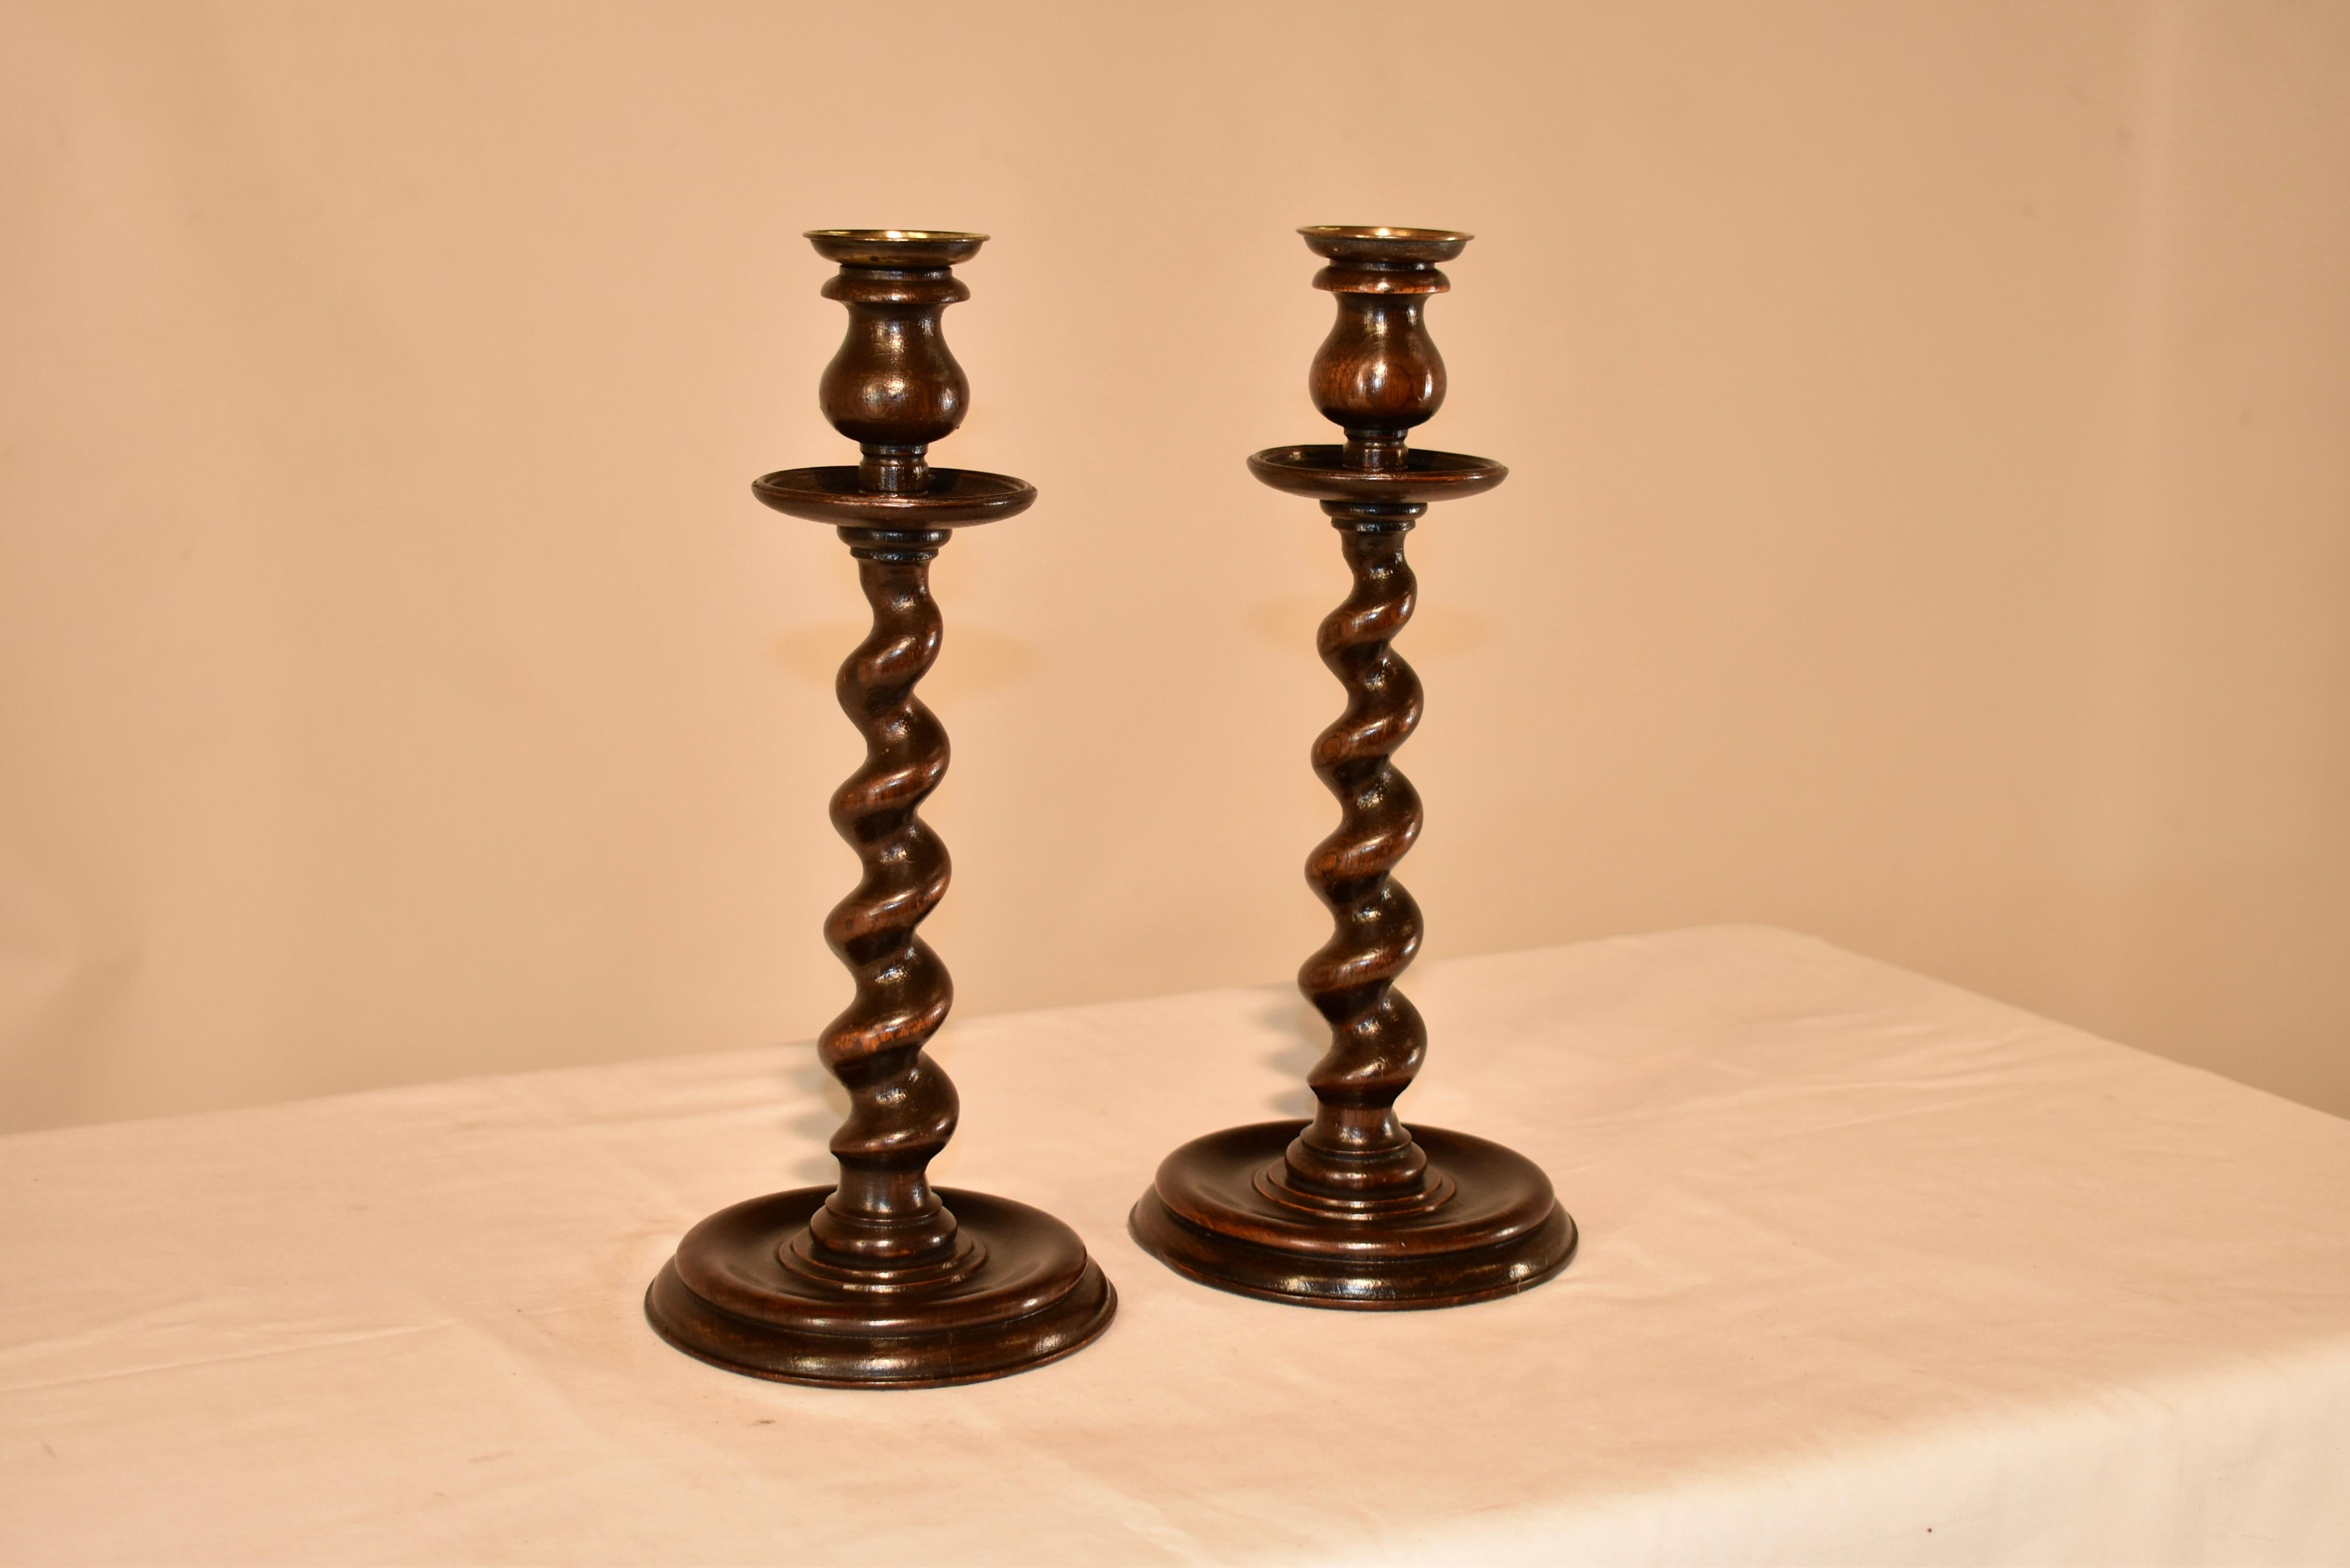 Pair of 19th century oak candlesticks from England. This wonderful pair of candlesticks have gorgeous tulip shaped turned candle cups, which have hand turned brass bobeches. The candle cups are over large hand turned wooden bobeches for an elegant